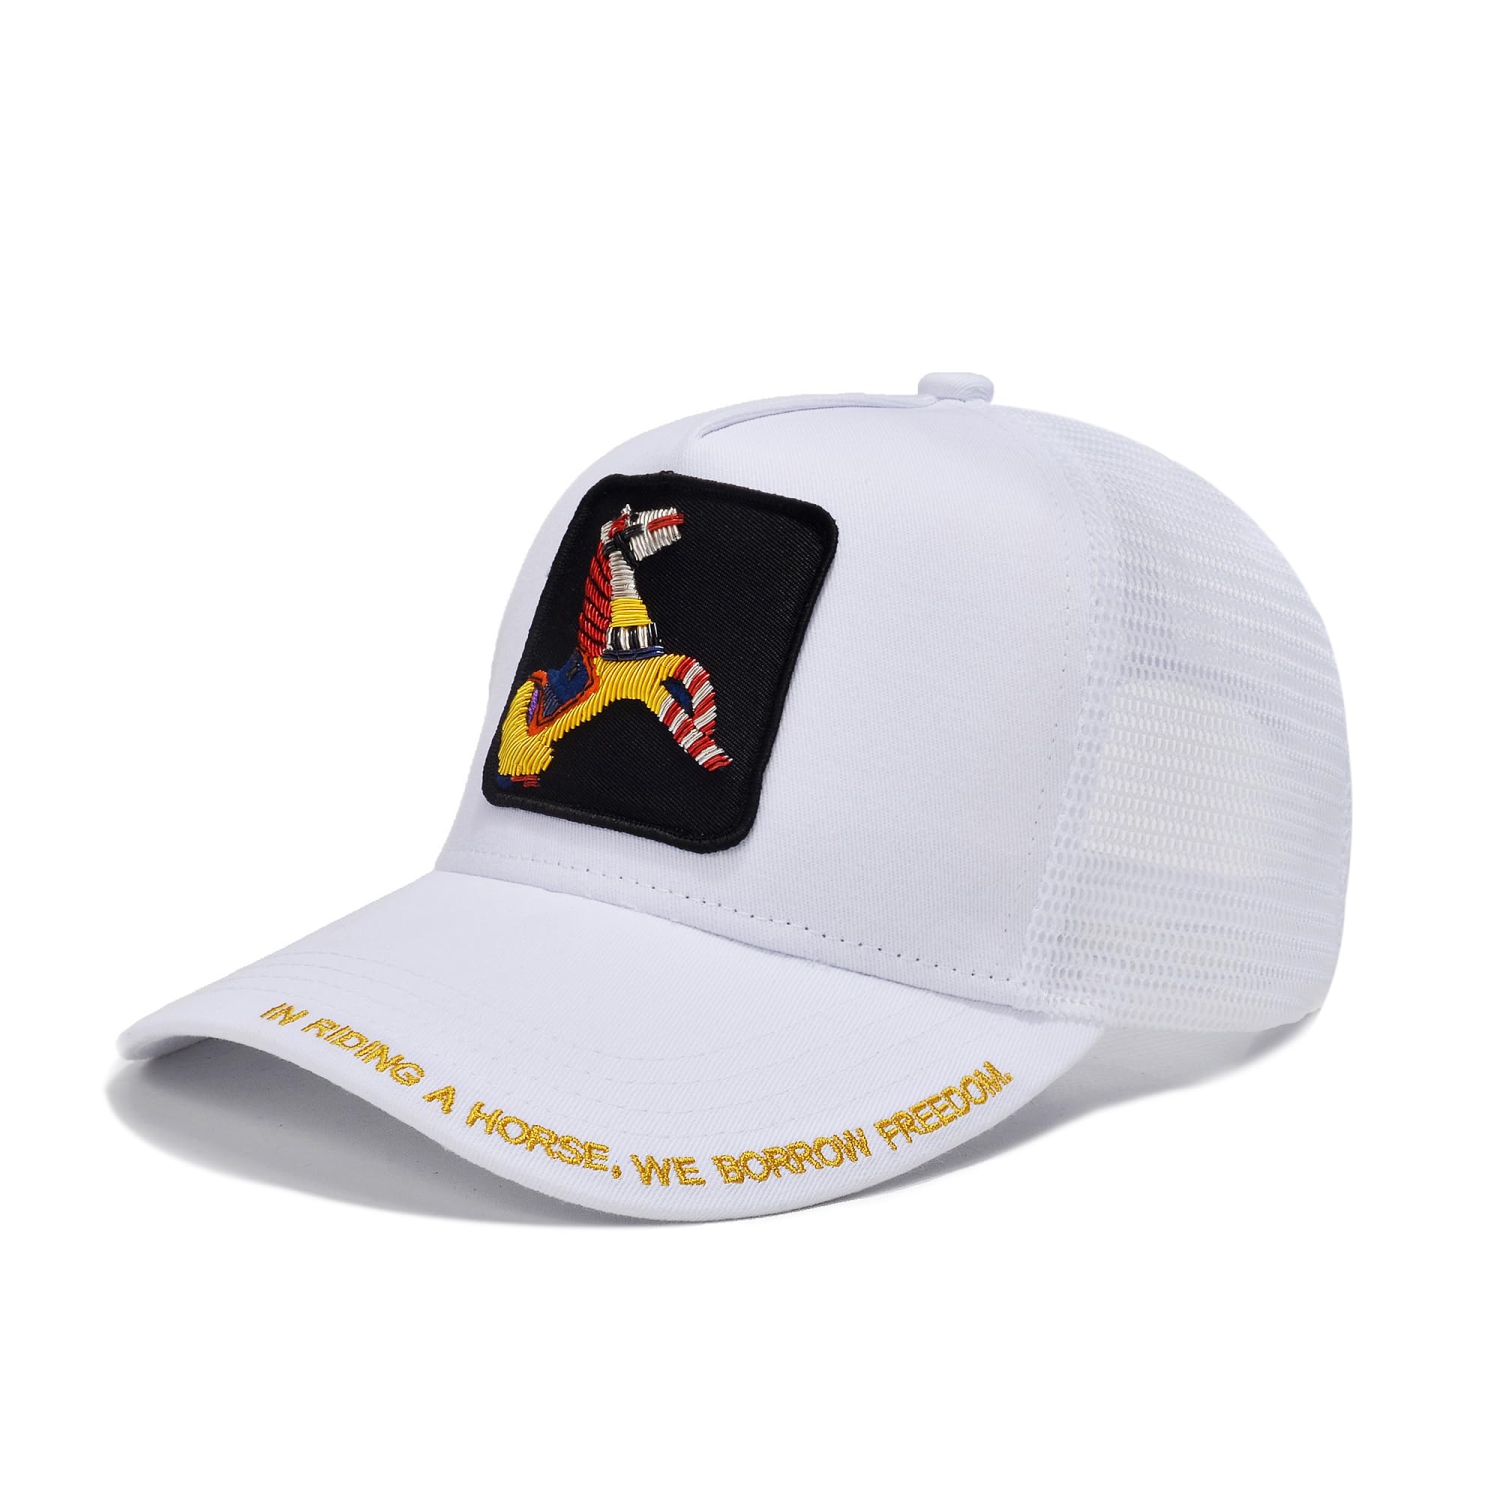 Trendy White Snapback Hats for Men and Women - Fashionable Baseball Caps and Trucker Hats - Original Gorras para Hombres and Women's Hats.